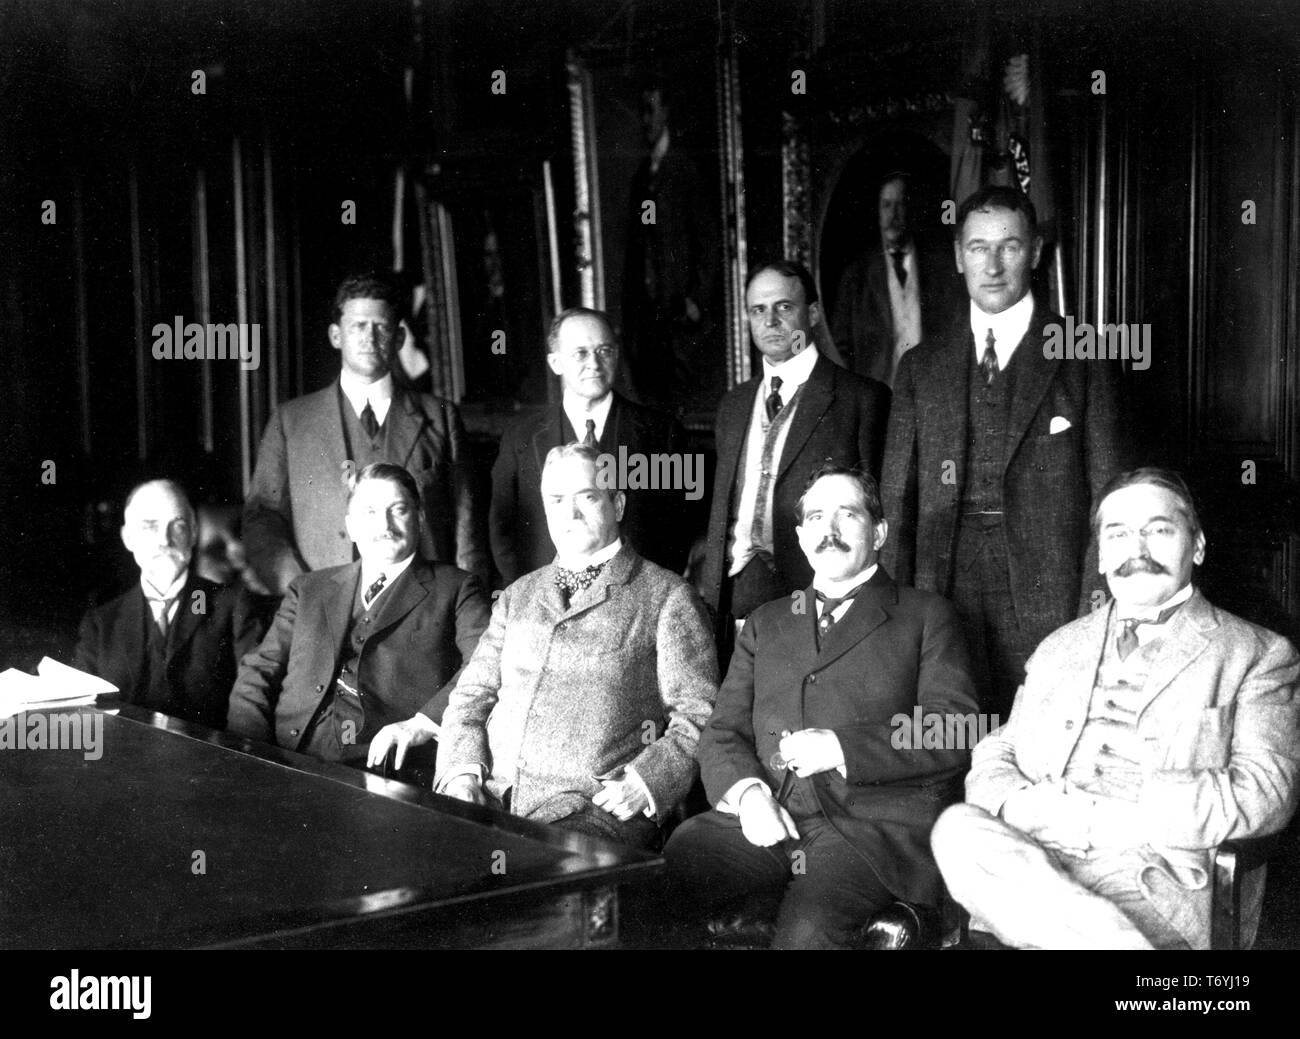 Photograph of the first meeting of the National Advisory Committee for Aeronautics (NACA) in the office of the Secretary of War, Dr William Durand, Dr S.W, April 23, 1915. Stratton, George P. Scriven, Dr C.F. Marvin, Dr Michael I. Pupin, Holden C. Richardson, Dr John F. Hayford, Mark L. Bristol, Samuel Reber, Dr Joseph S. Ames, and B. R. Newton. Image courtesy National Aeronautics and Space Administration (NASA). () Stock Photo